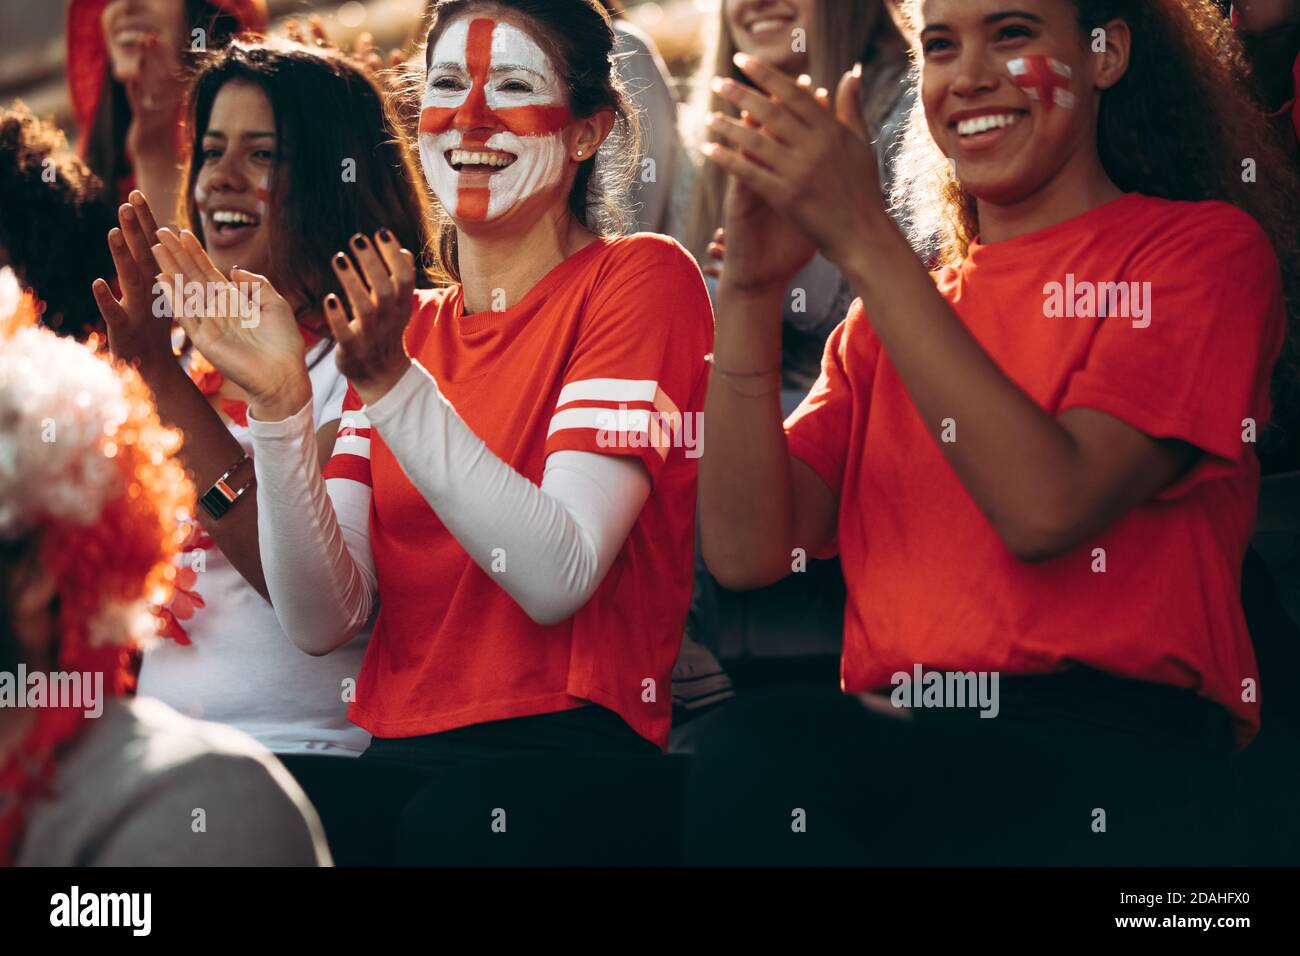 Happy young sports fans at live game clapping and cheering for their team. England football fans enjoying during a match. Stock Photo